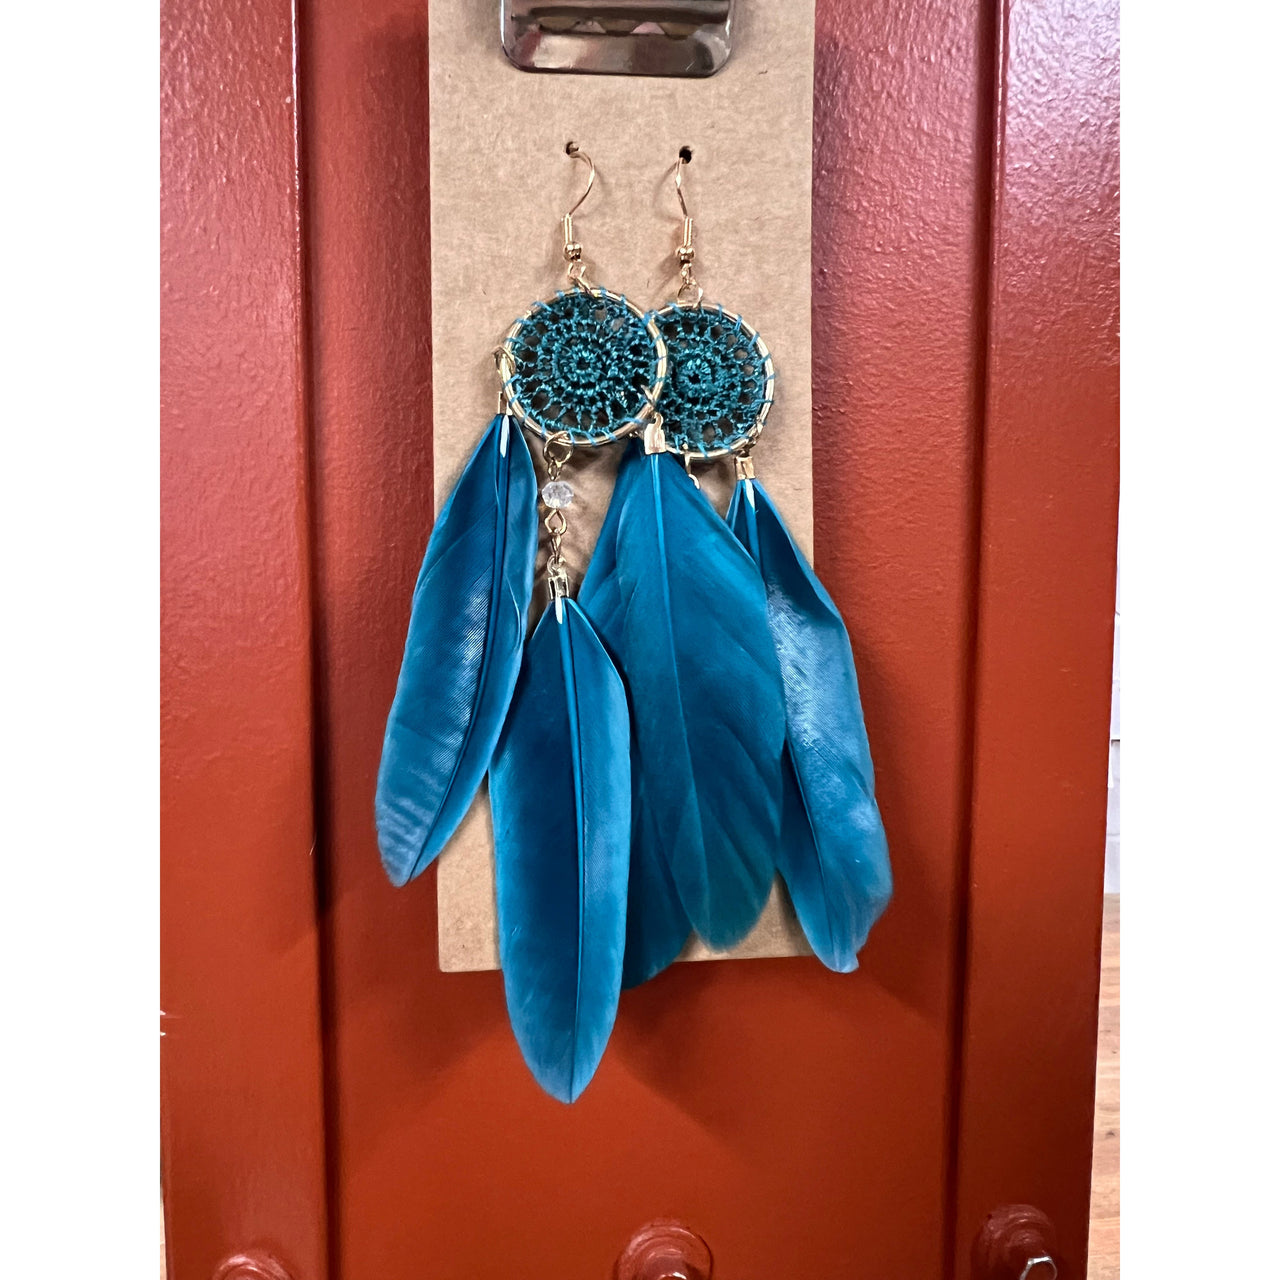 Live Beautifully Earrings - Dream Catcher Turquoise